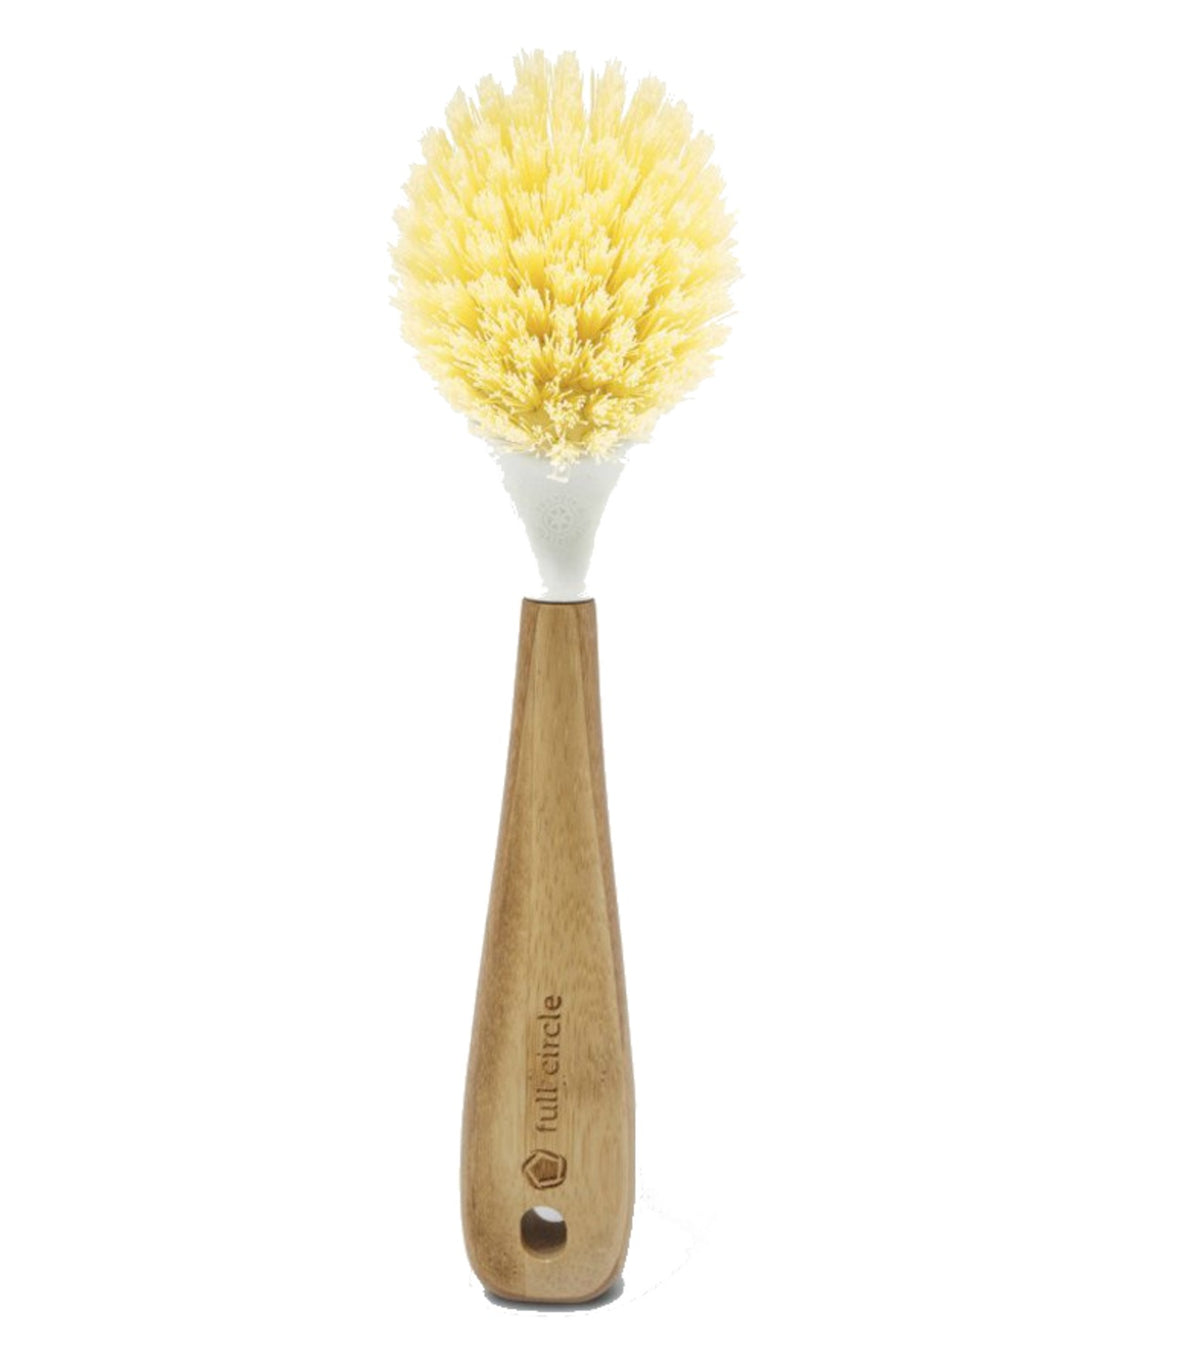 buy cleaning brushes at cheap rate in bulk. wholesale & retail cleaning products store.